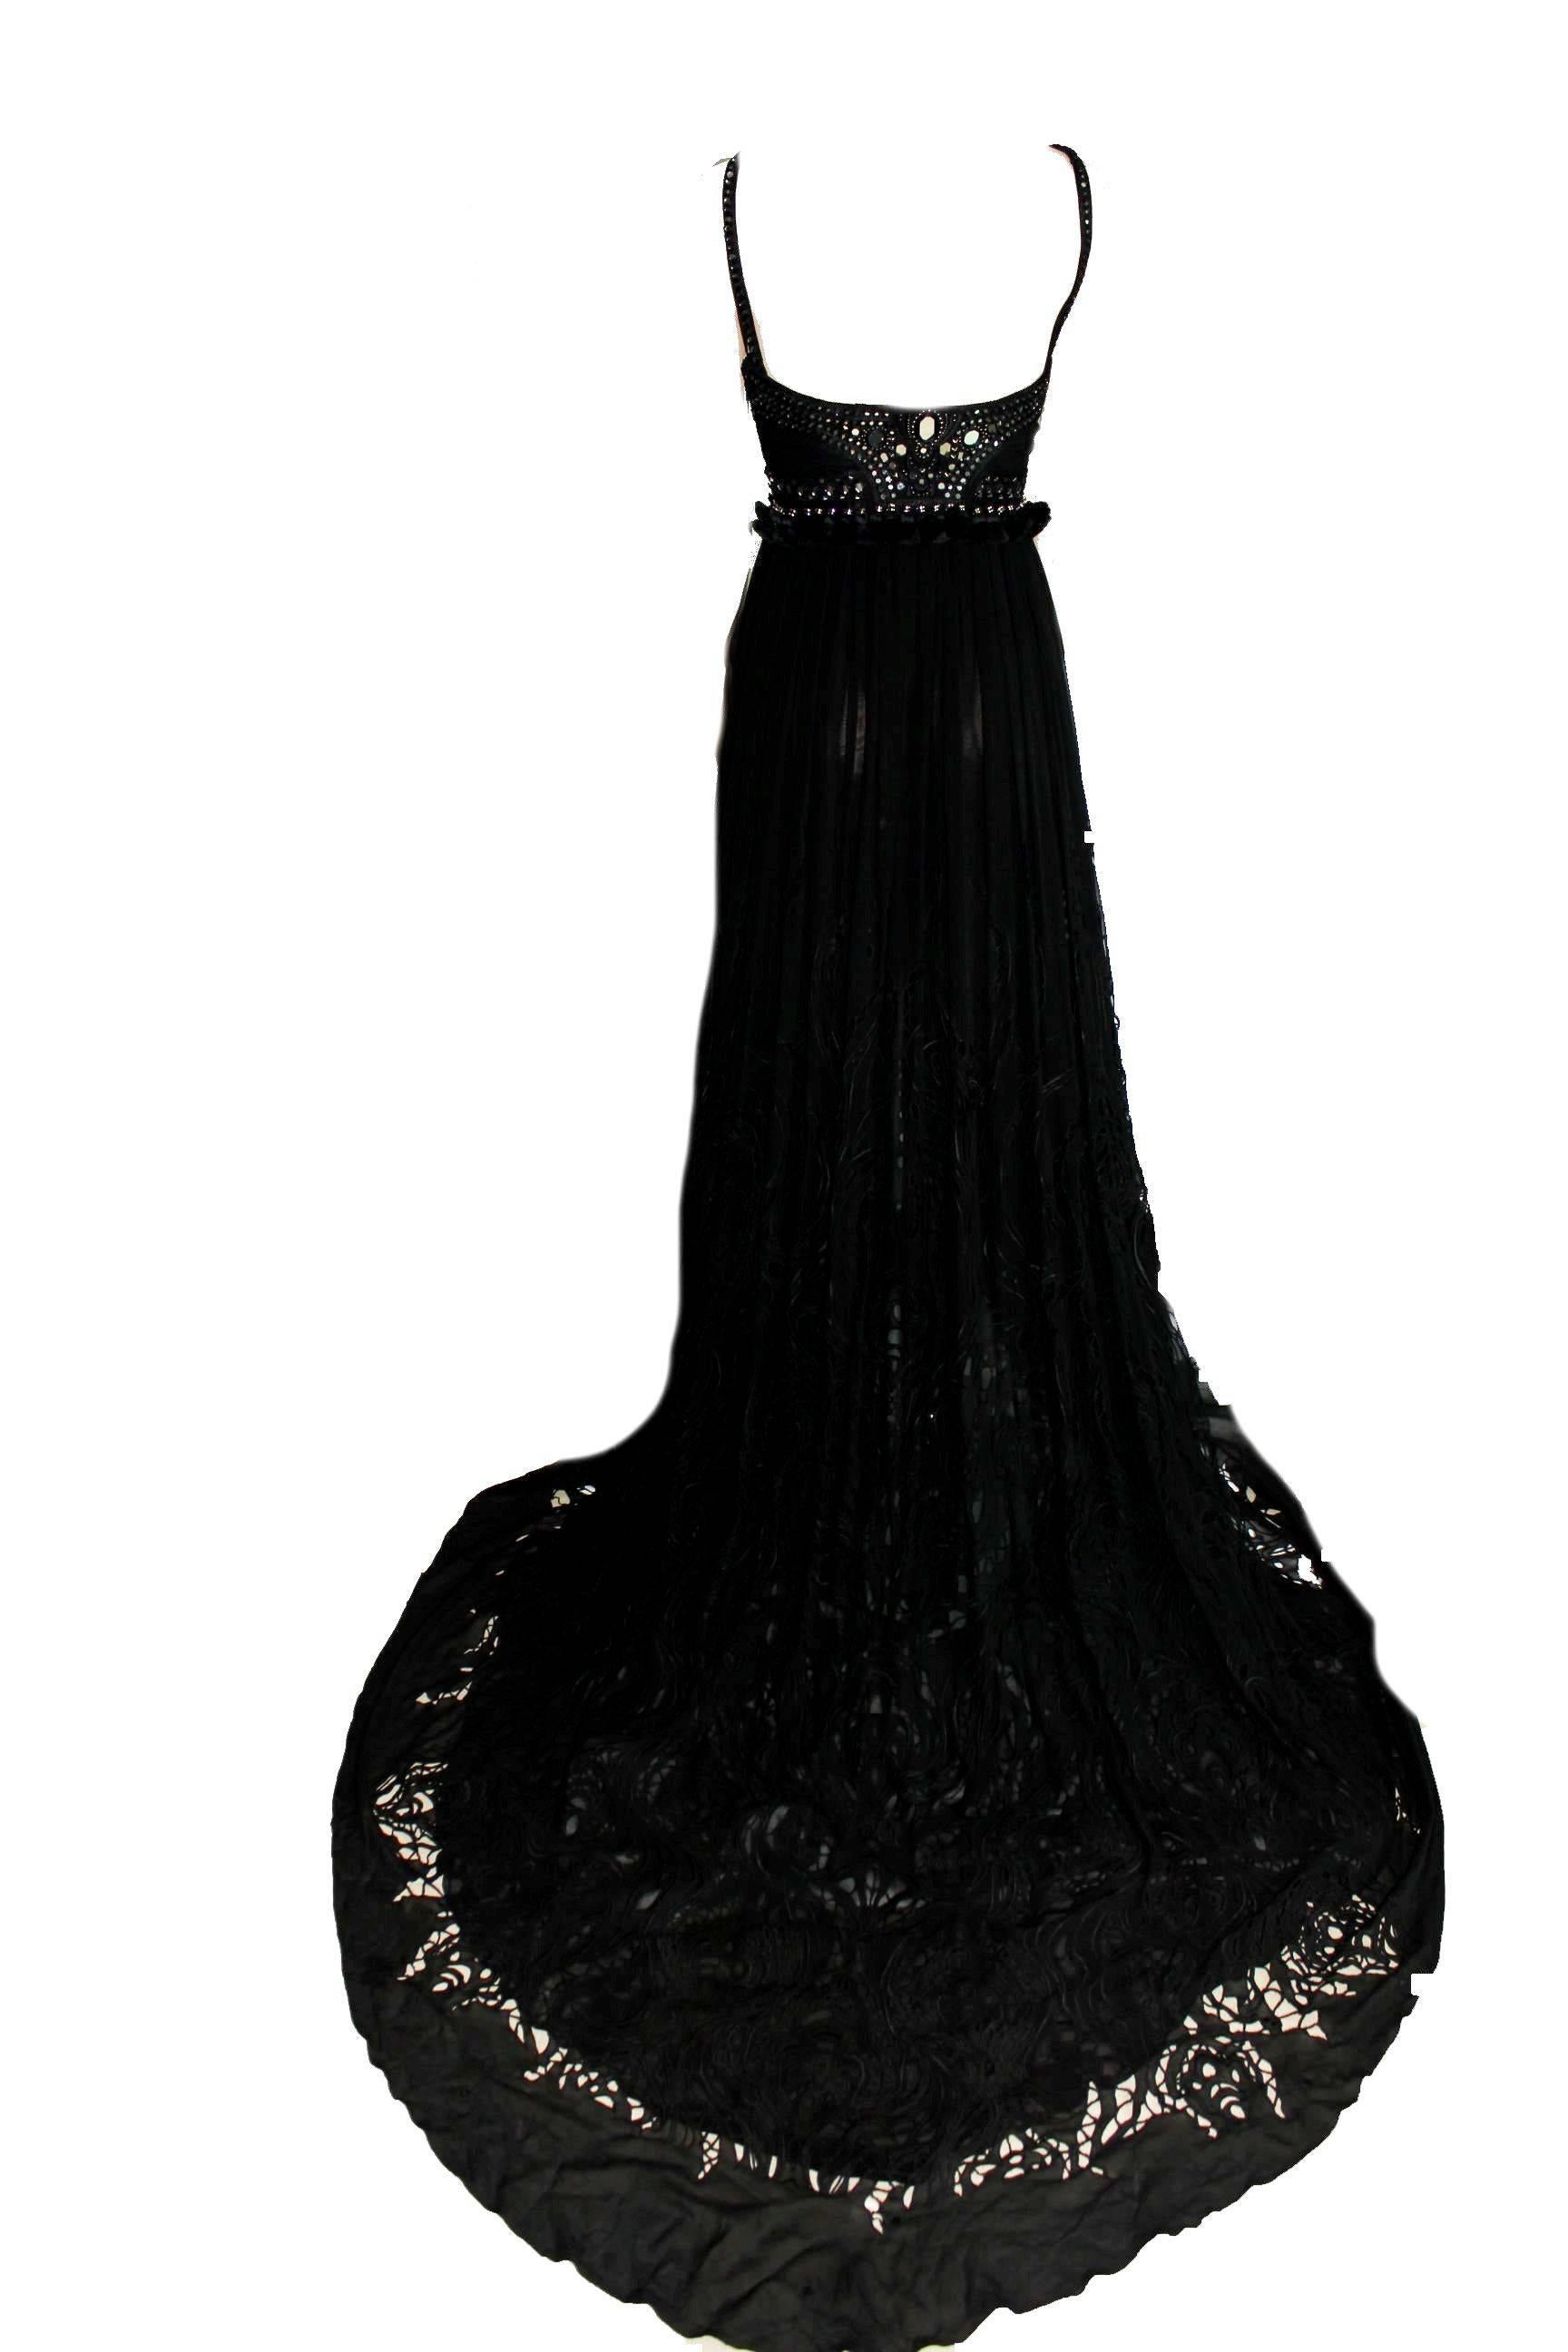 ABSOLUTELY INSANE EMILIO PUCCI BLACK MIRROR TASSLE EVENING GOWN

DESIGNED BY PETER DUNDAS

EXCLUSIVELY FOR KATY PERRY - ONLY ONE!

    Exclusive and gorgeous EMILIO PUCCI evening gown
    Sexy cutout details
    Decorated with mirror details and